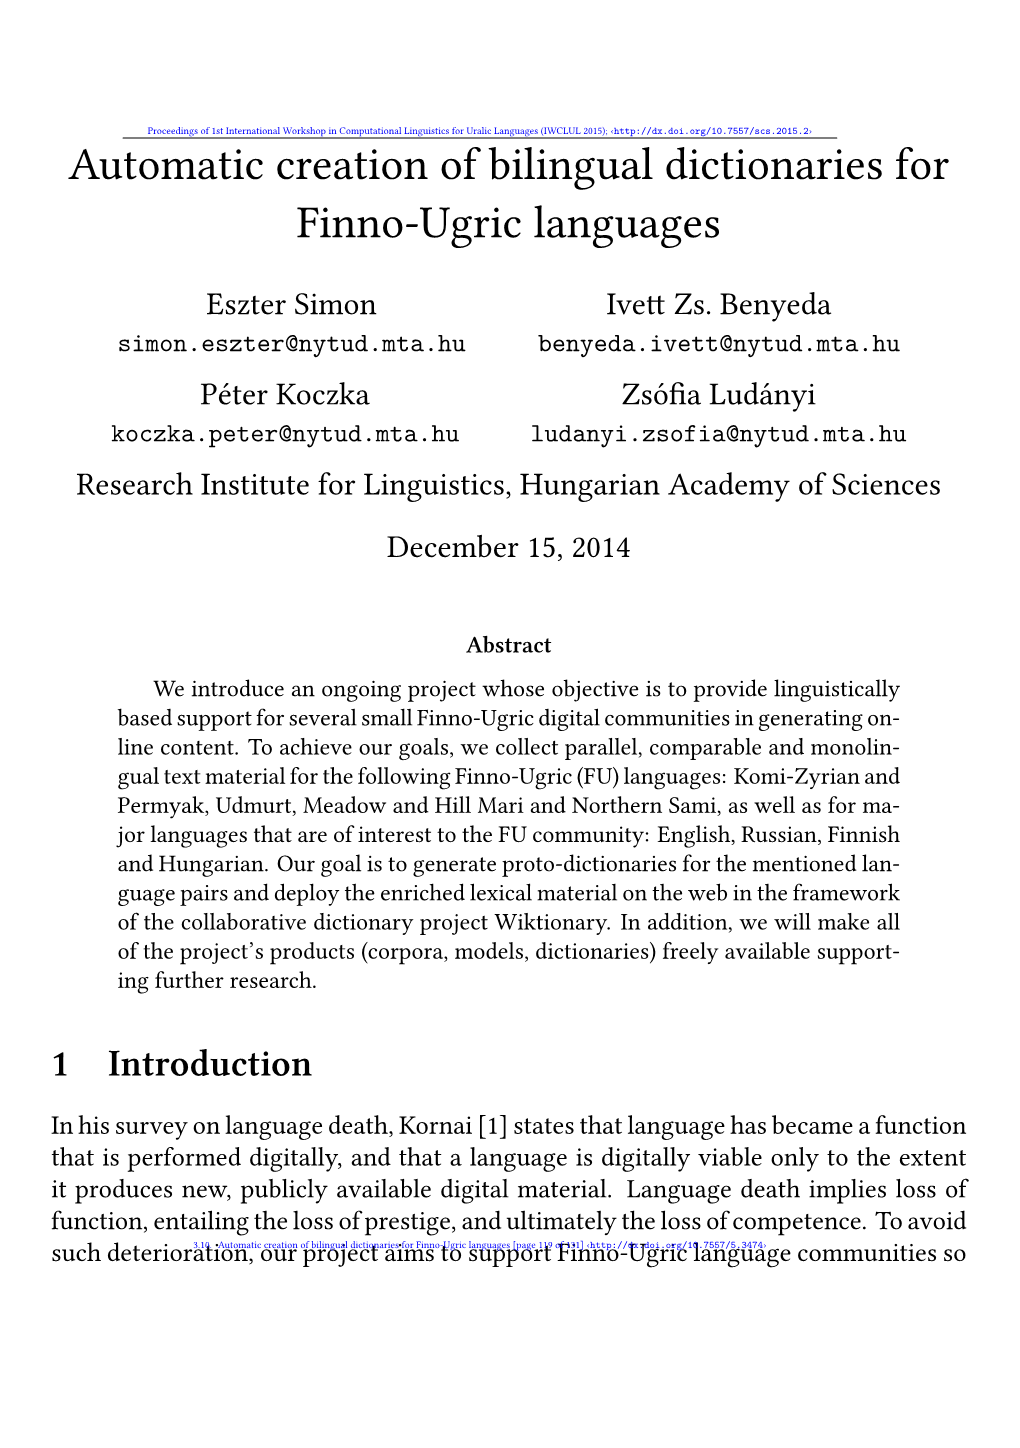 Automatic Creation of Bilingual Dictionaries for Finno-Ugric Languages